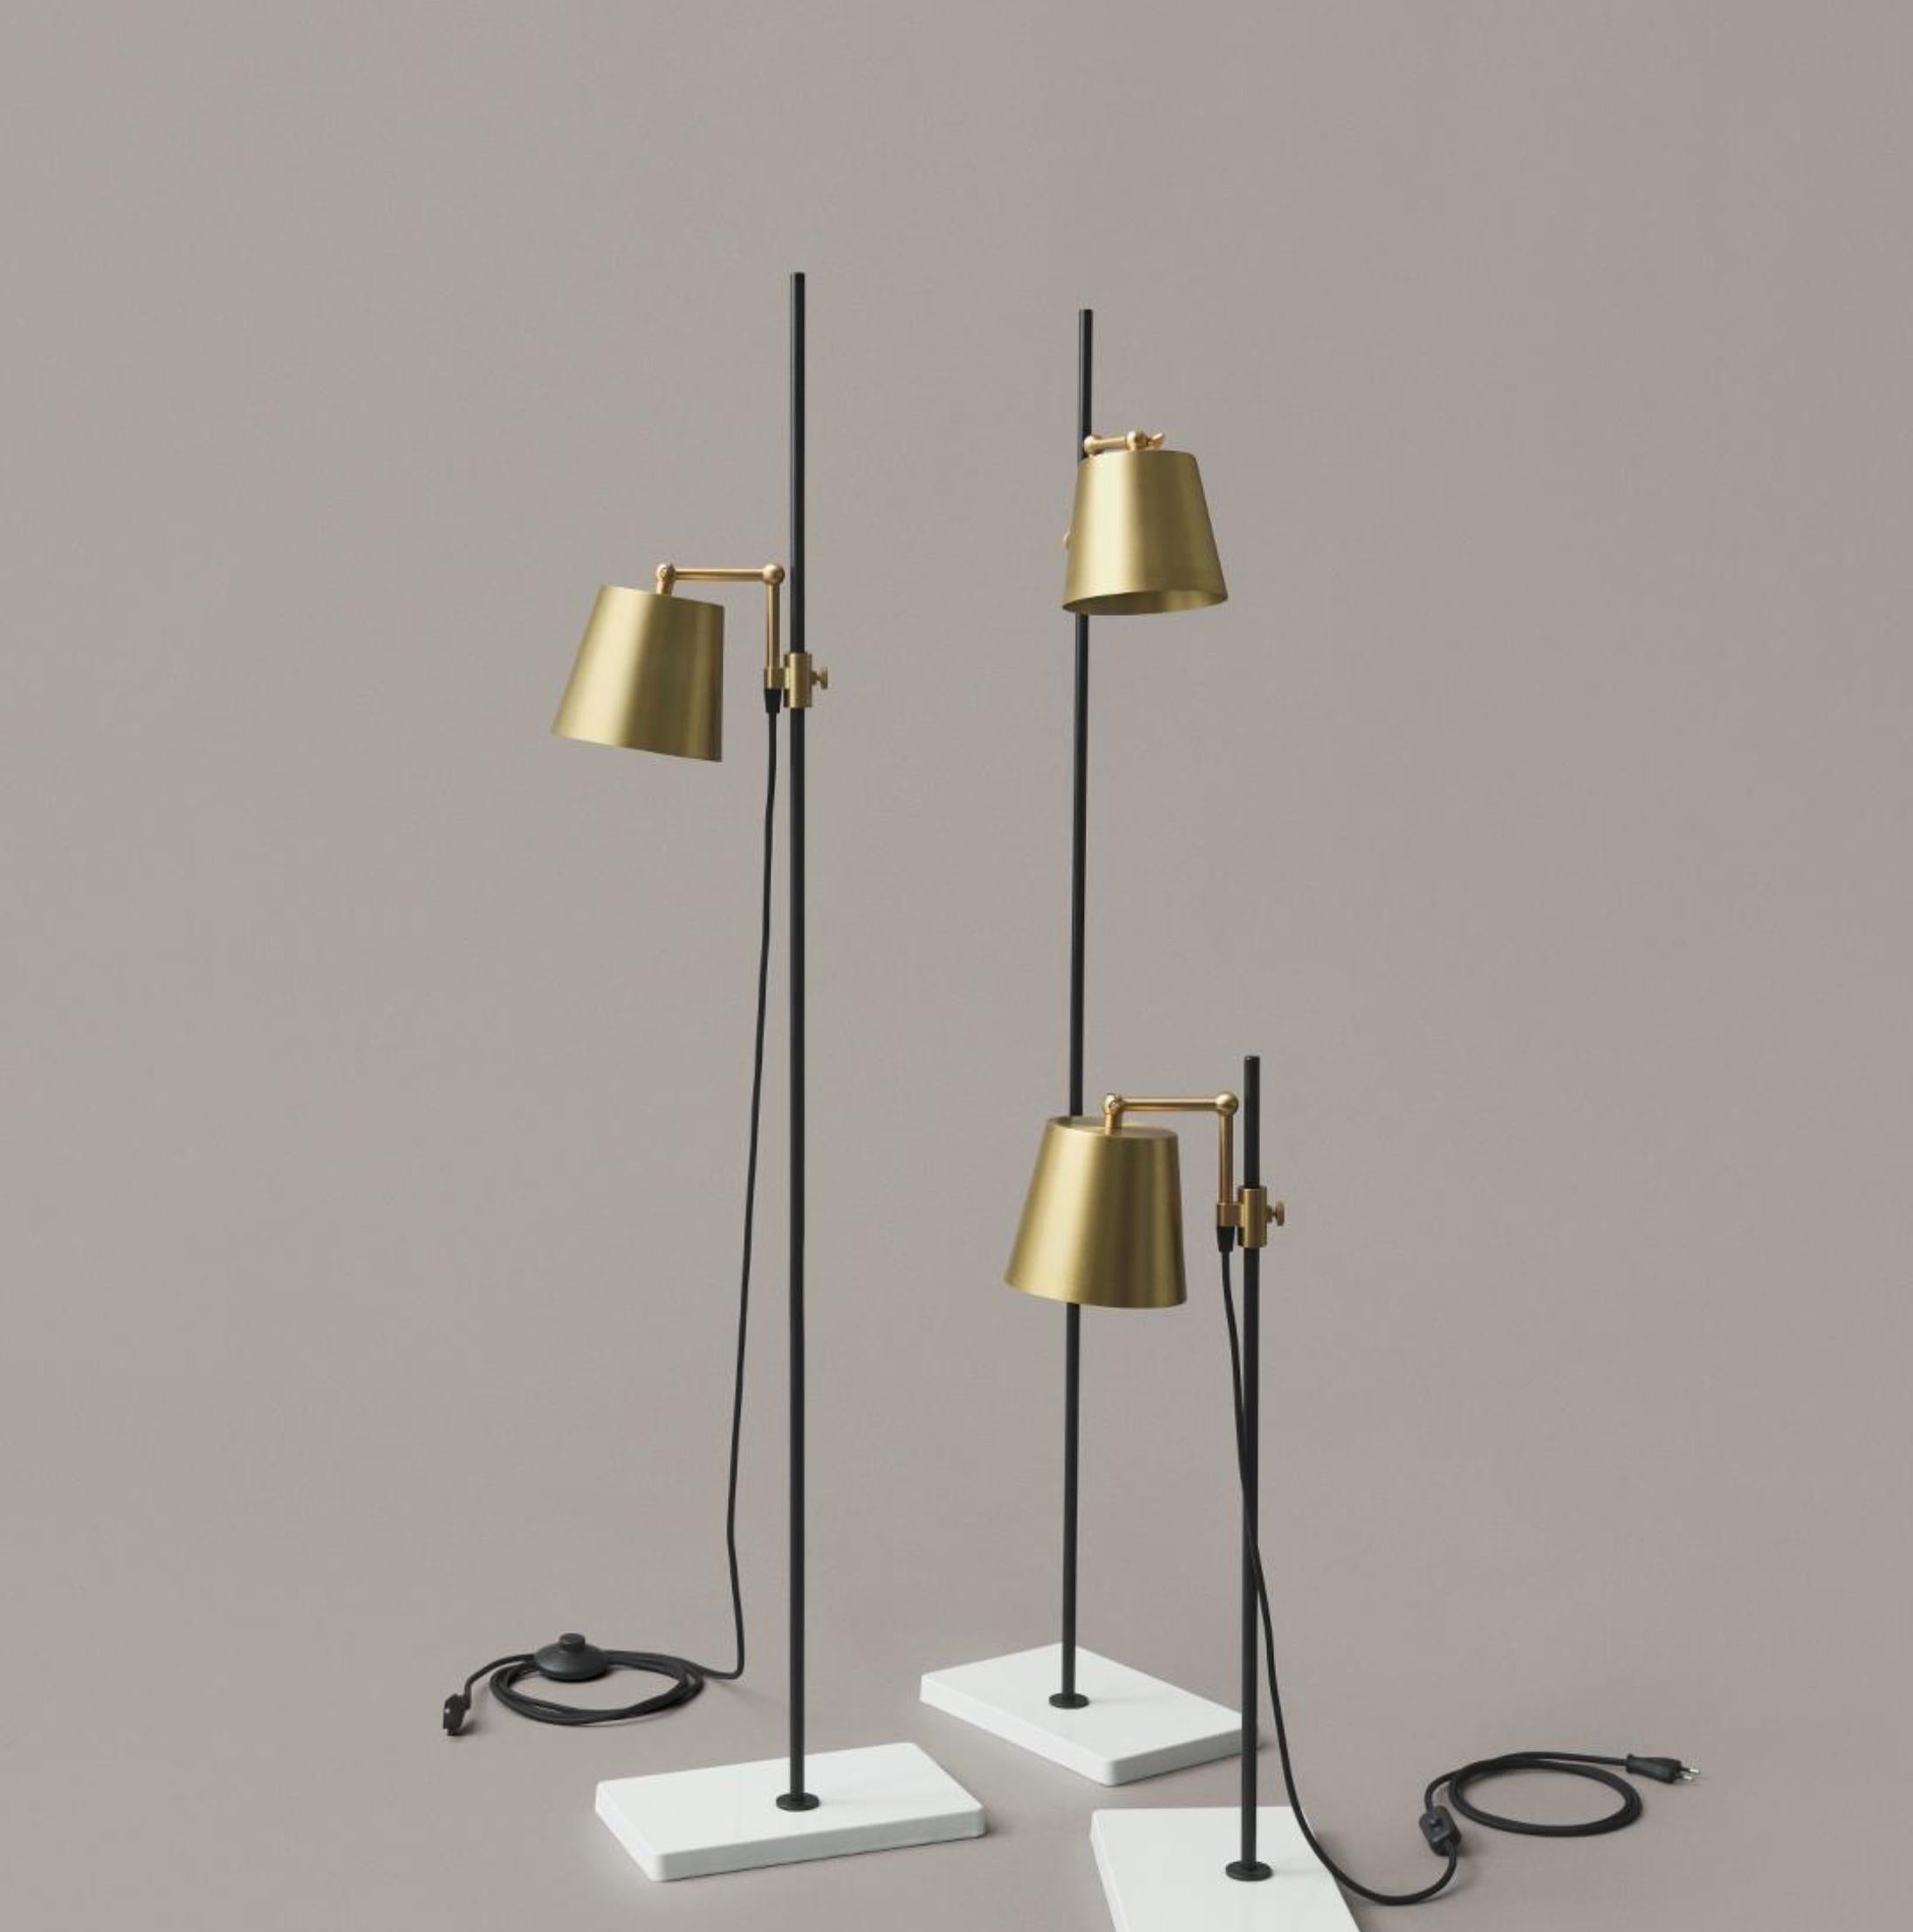 The Lab Light design came about from a genuine fascination with laboratory equipment and with all those fantastic clamps and levers — the perfect place to start designing a multi-functional lamp. Shade measures 16 centimeter in diameter. 

The